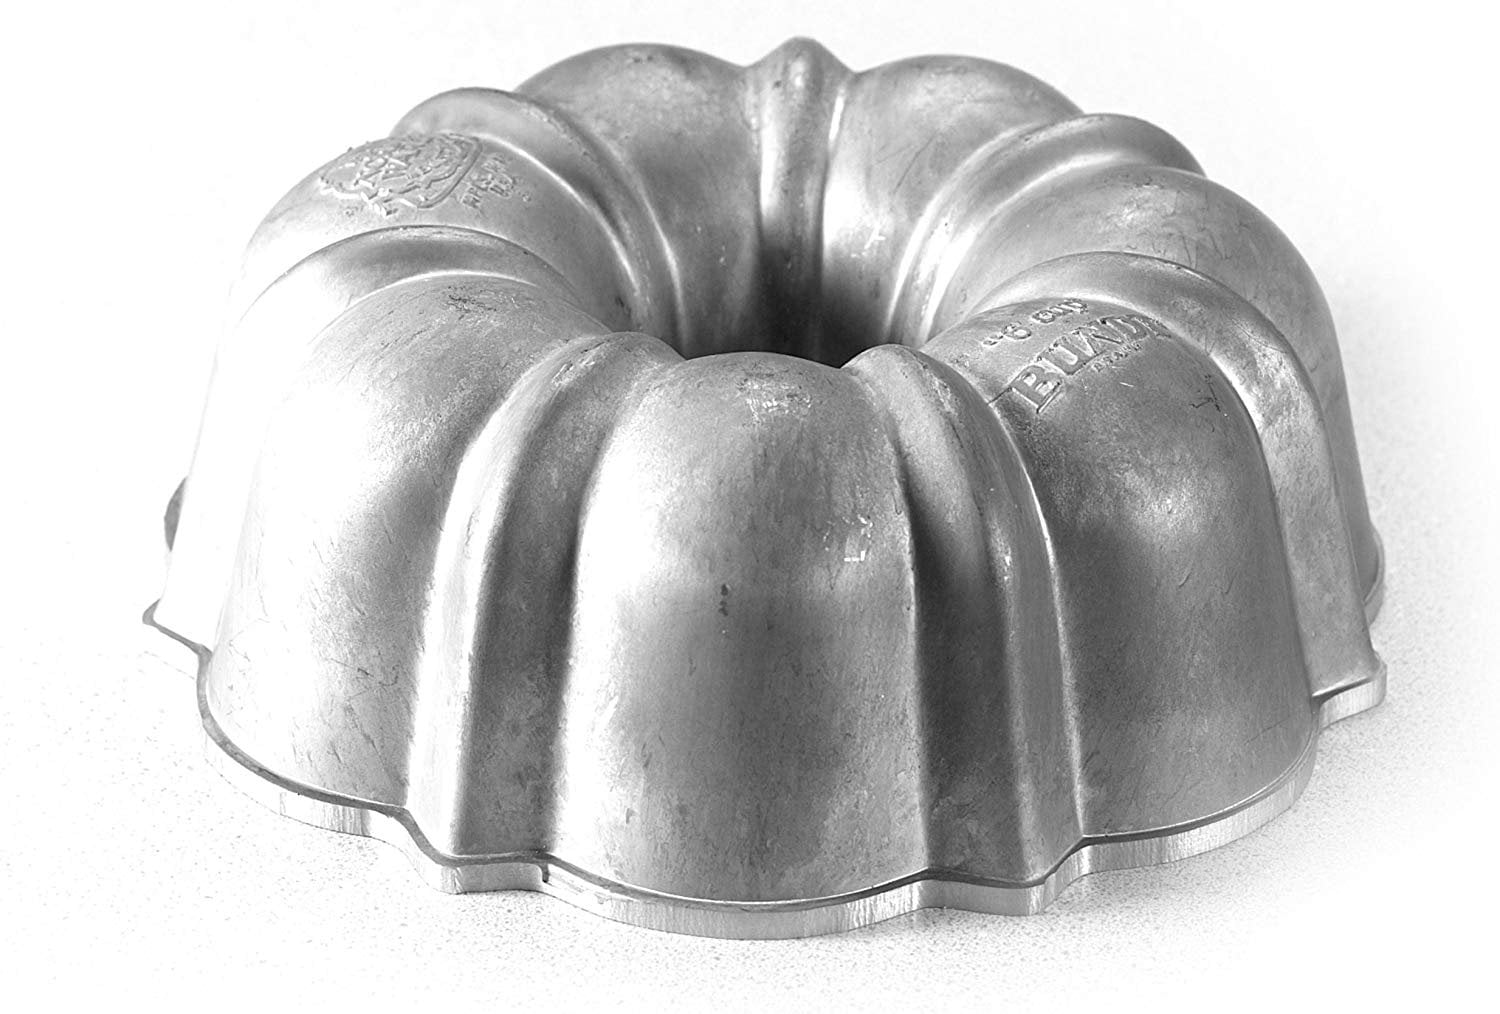 Nordic Ware Holiday Mini Muffin Pan 12 Bundt Cupcake Cast Aluminum Made in  USA